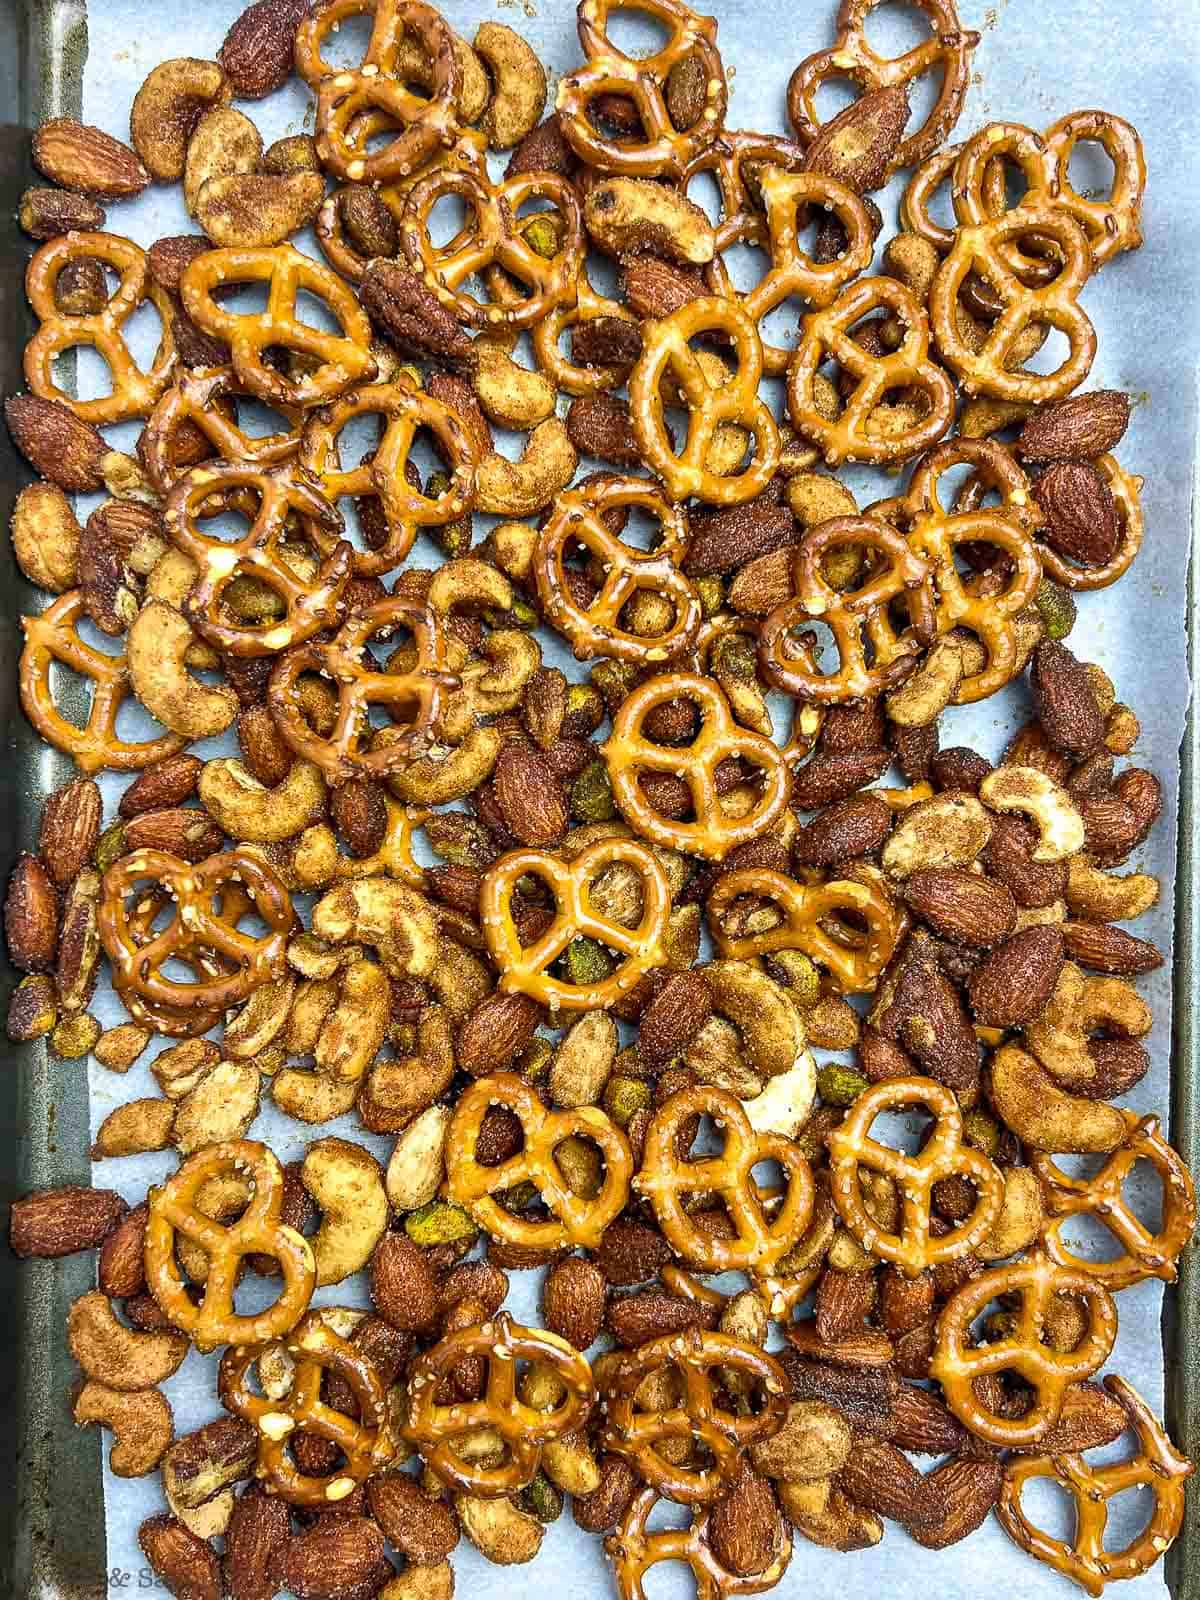 Pretzel and nut snack mix on a baking sheet.